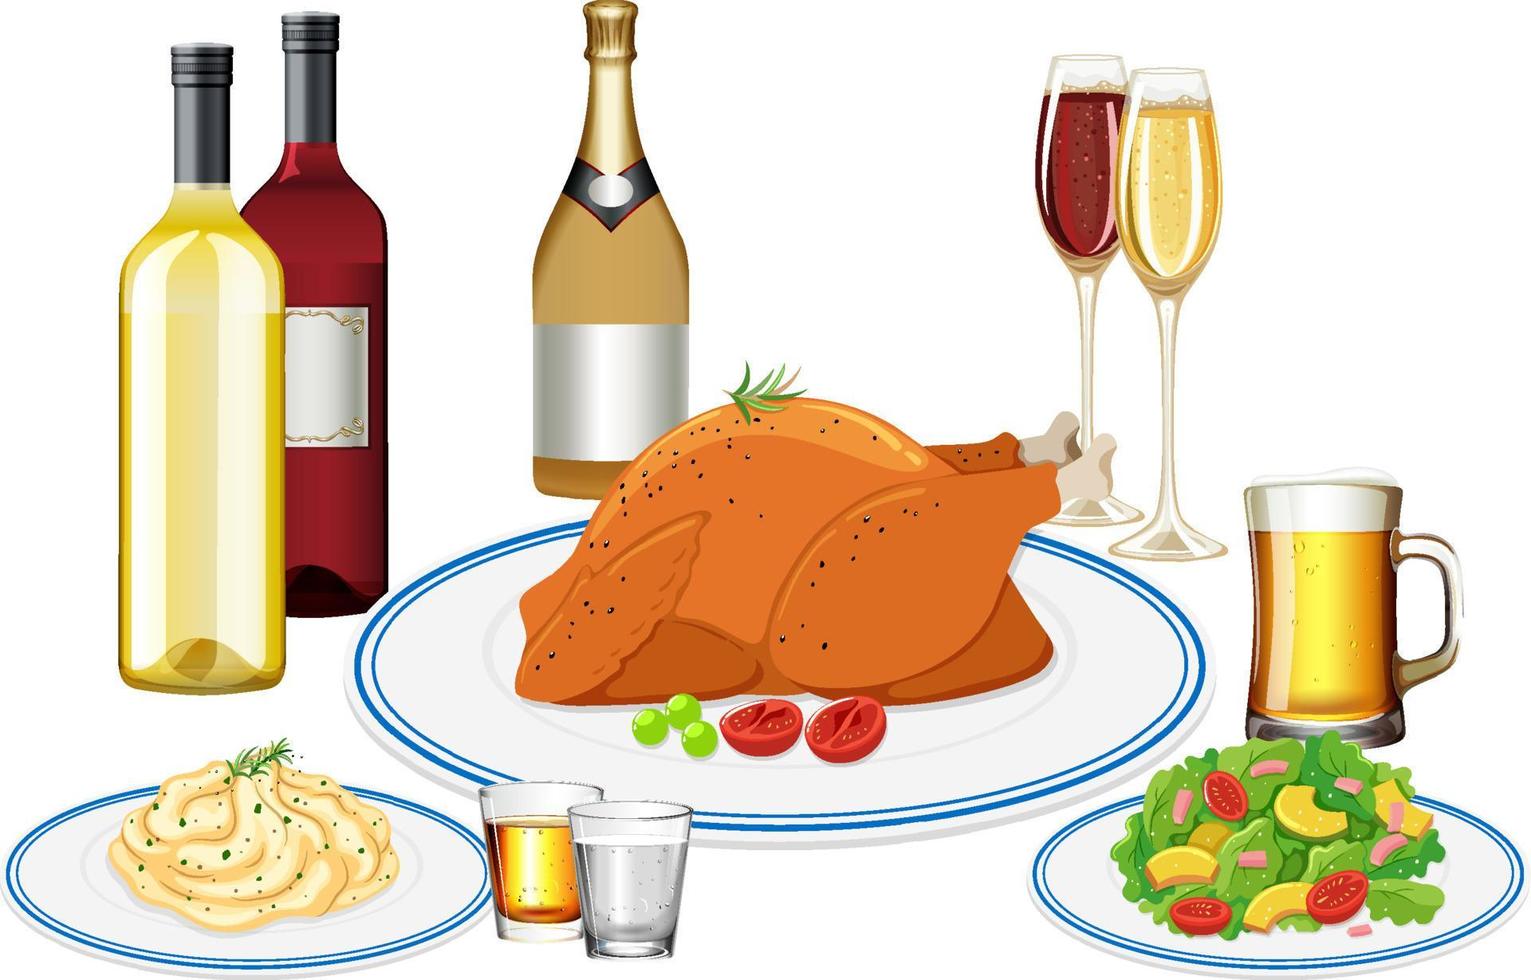 Dinner set with wine and chicken and salad vector